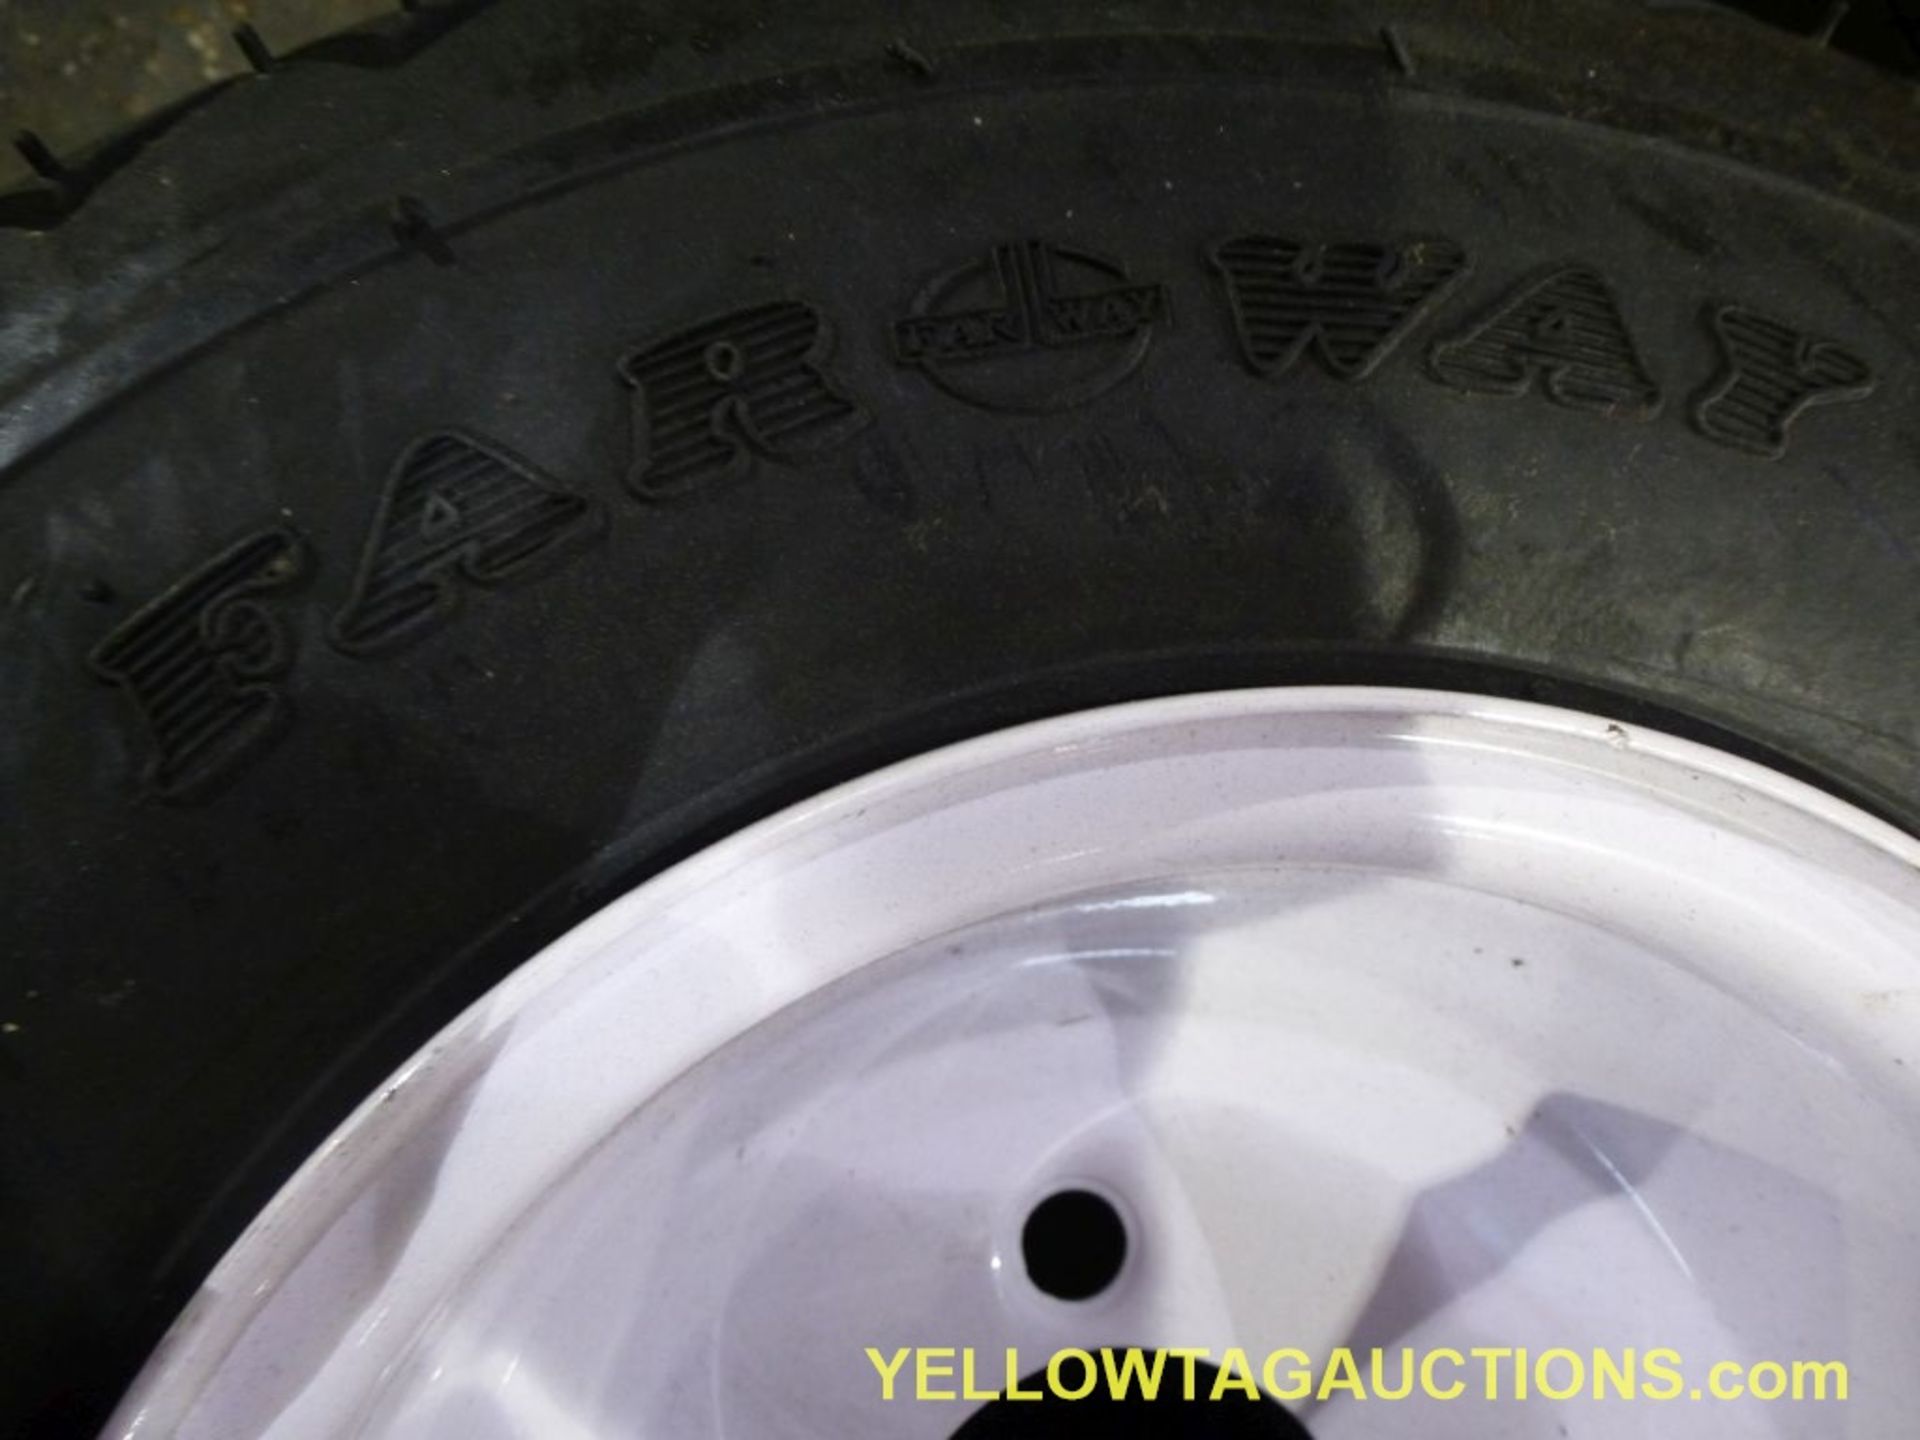 Lot of (12) FarWay 6-Ply Nylon Tires & Wheels|18 X 8.50 - 8NHS|Tag: 438 - Image 3 of 8